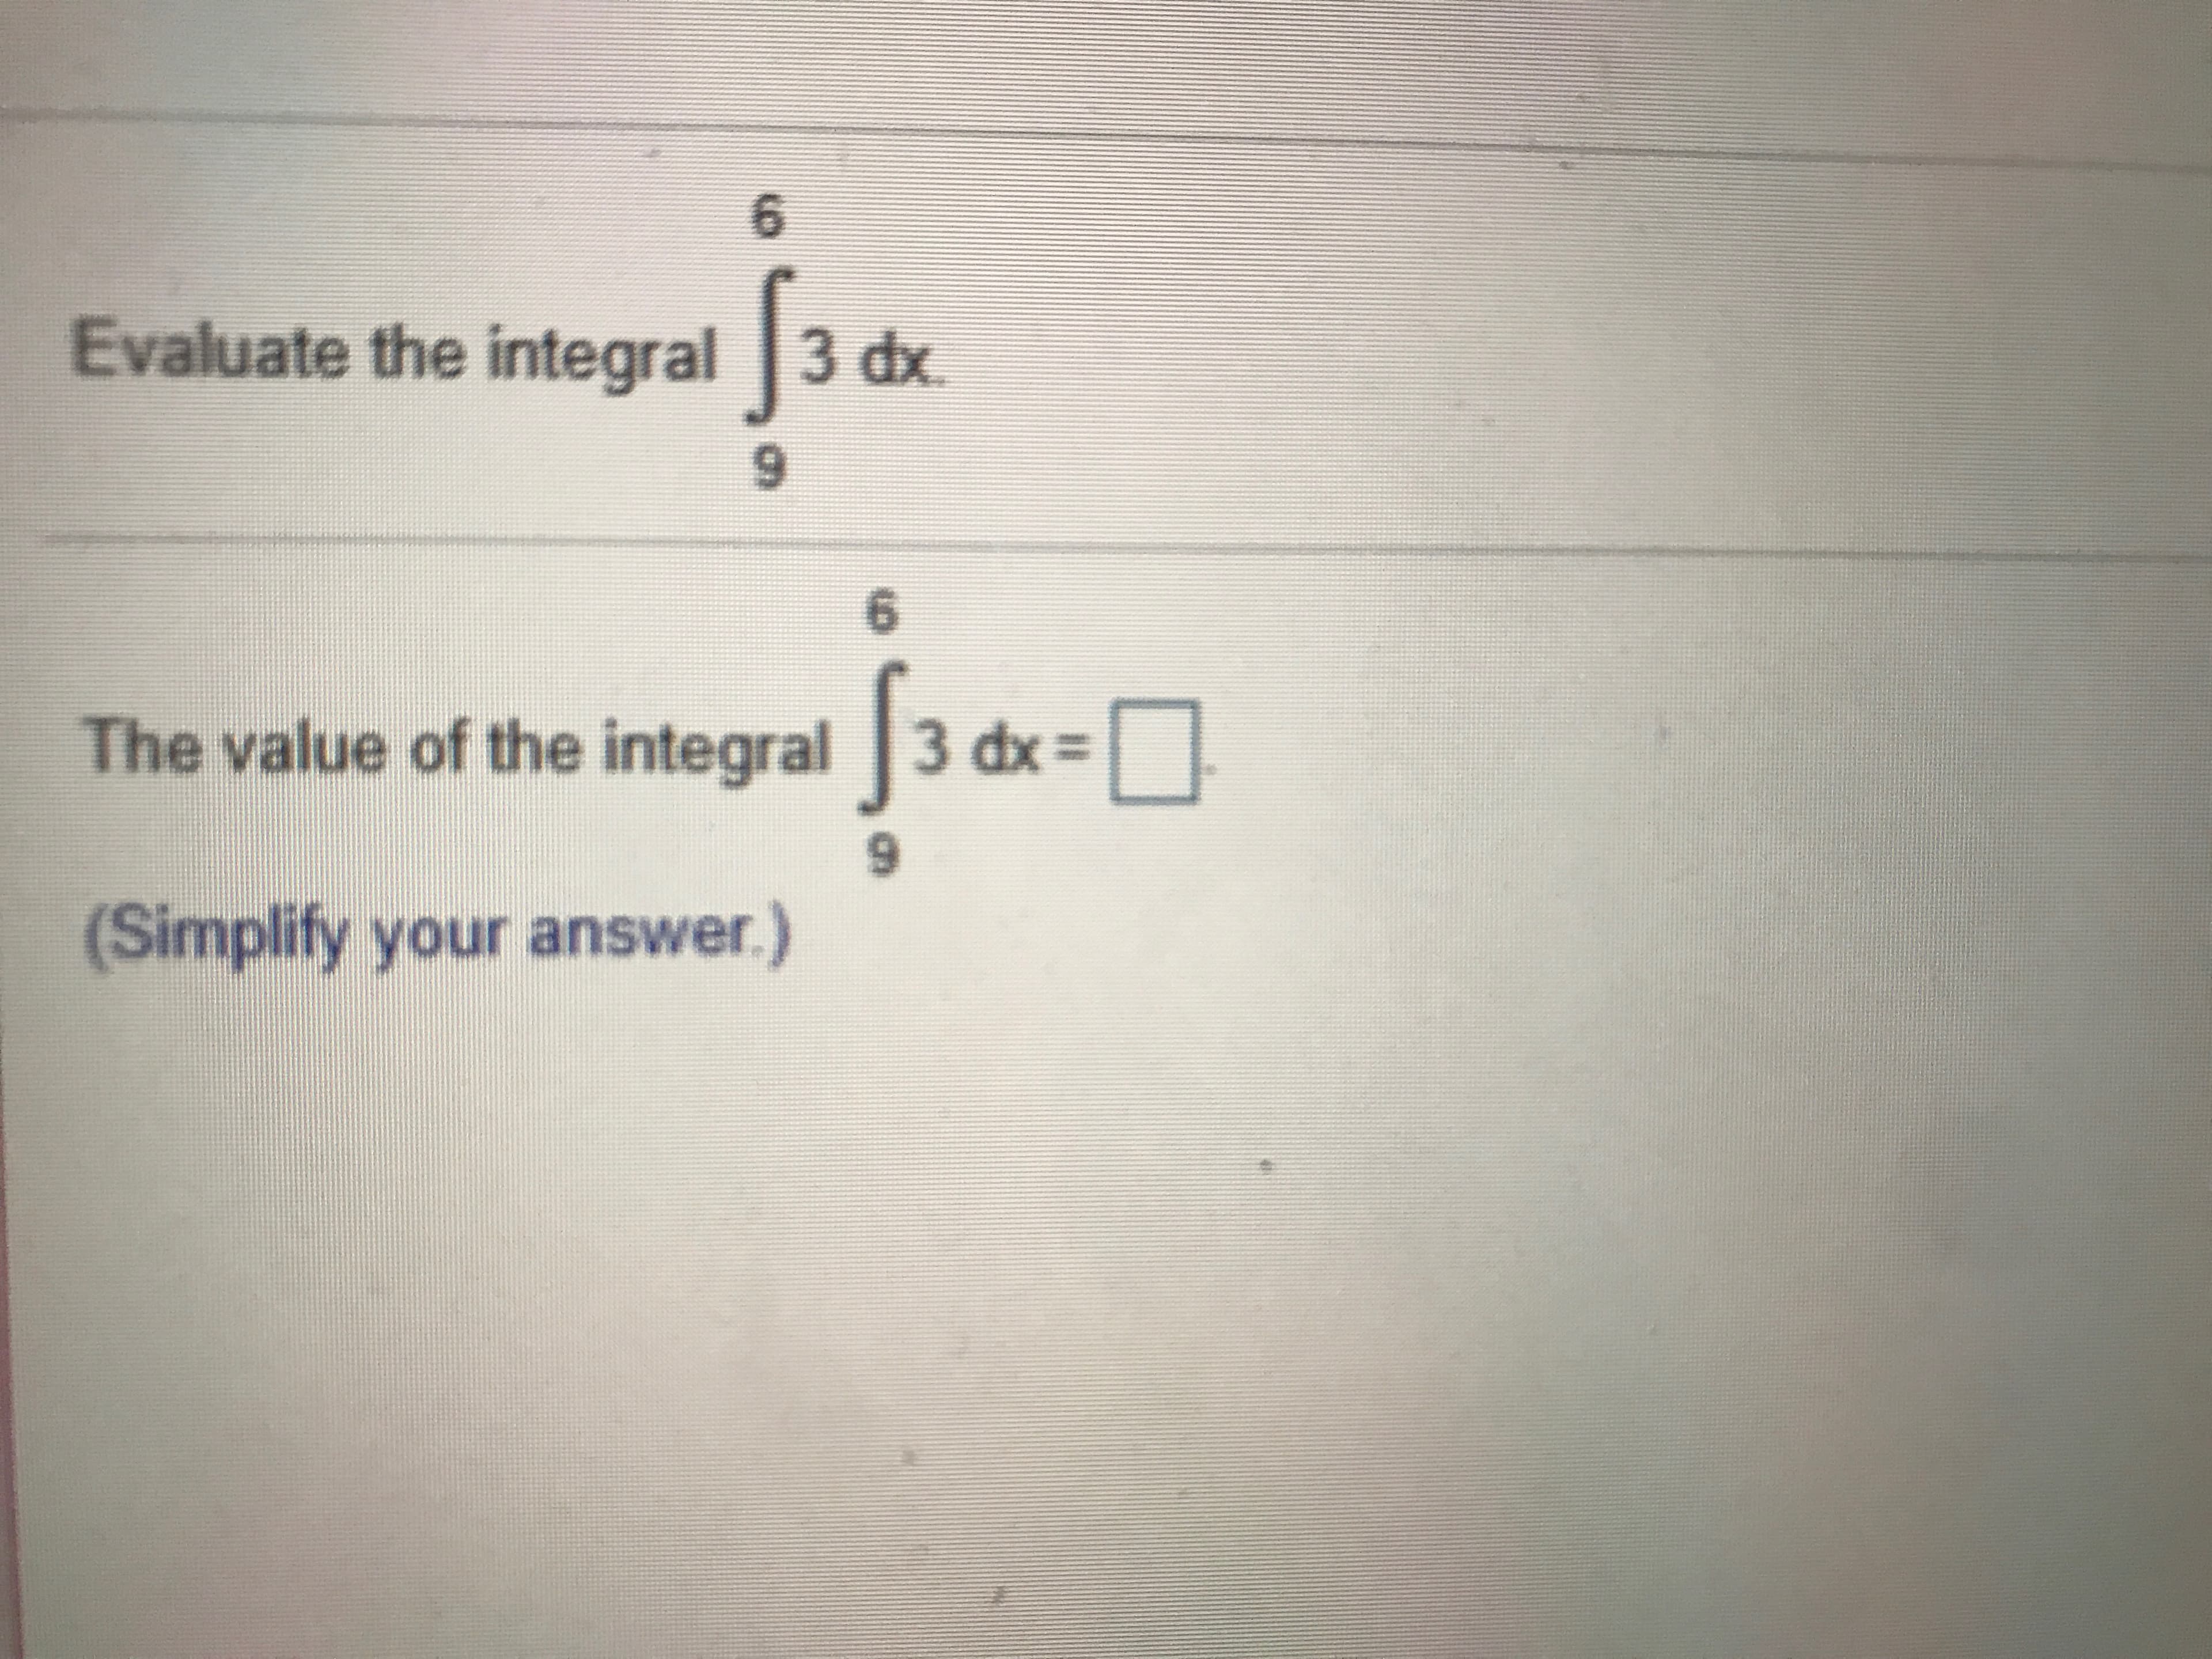 Evaluate the integral 3 dx.
[вa
6.
6.
The value of the integral 3 dx =
(Simplify your answer.)
